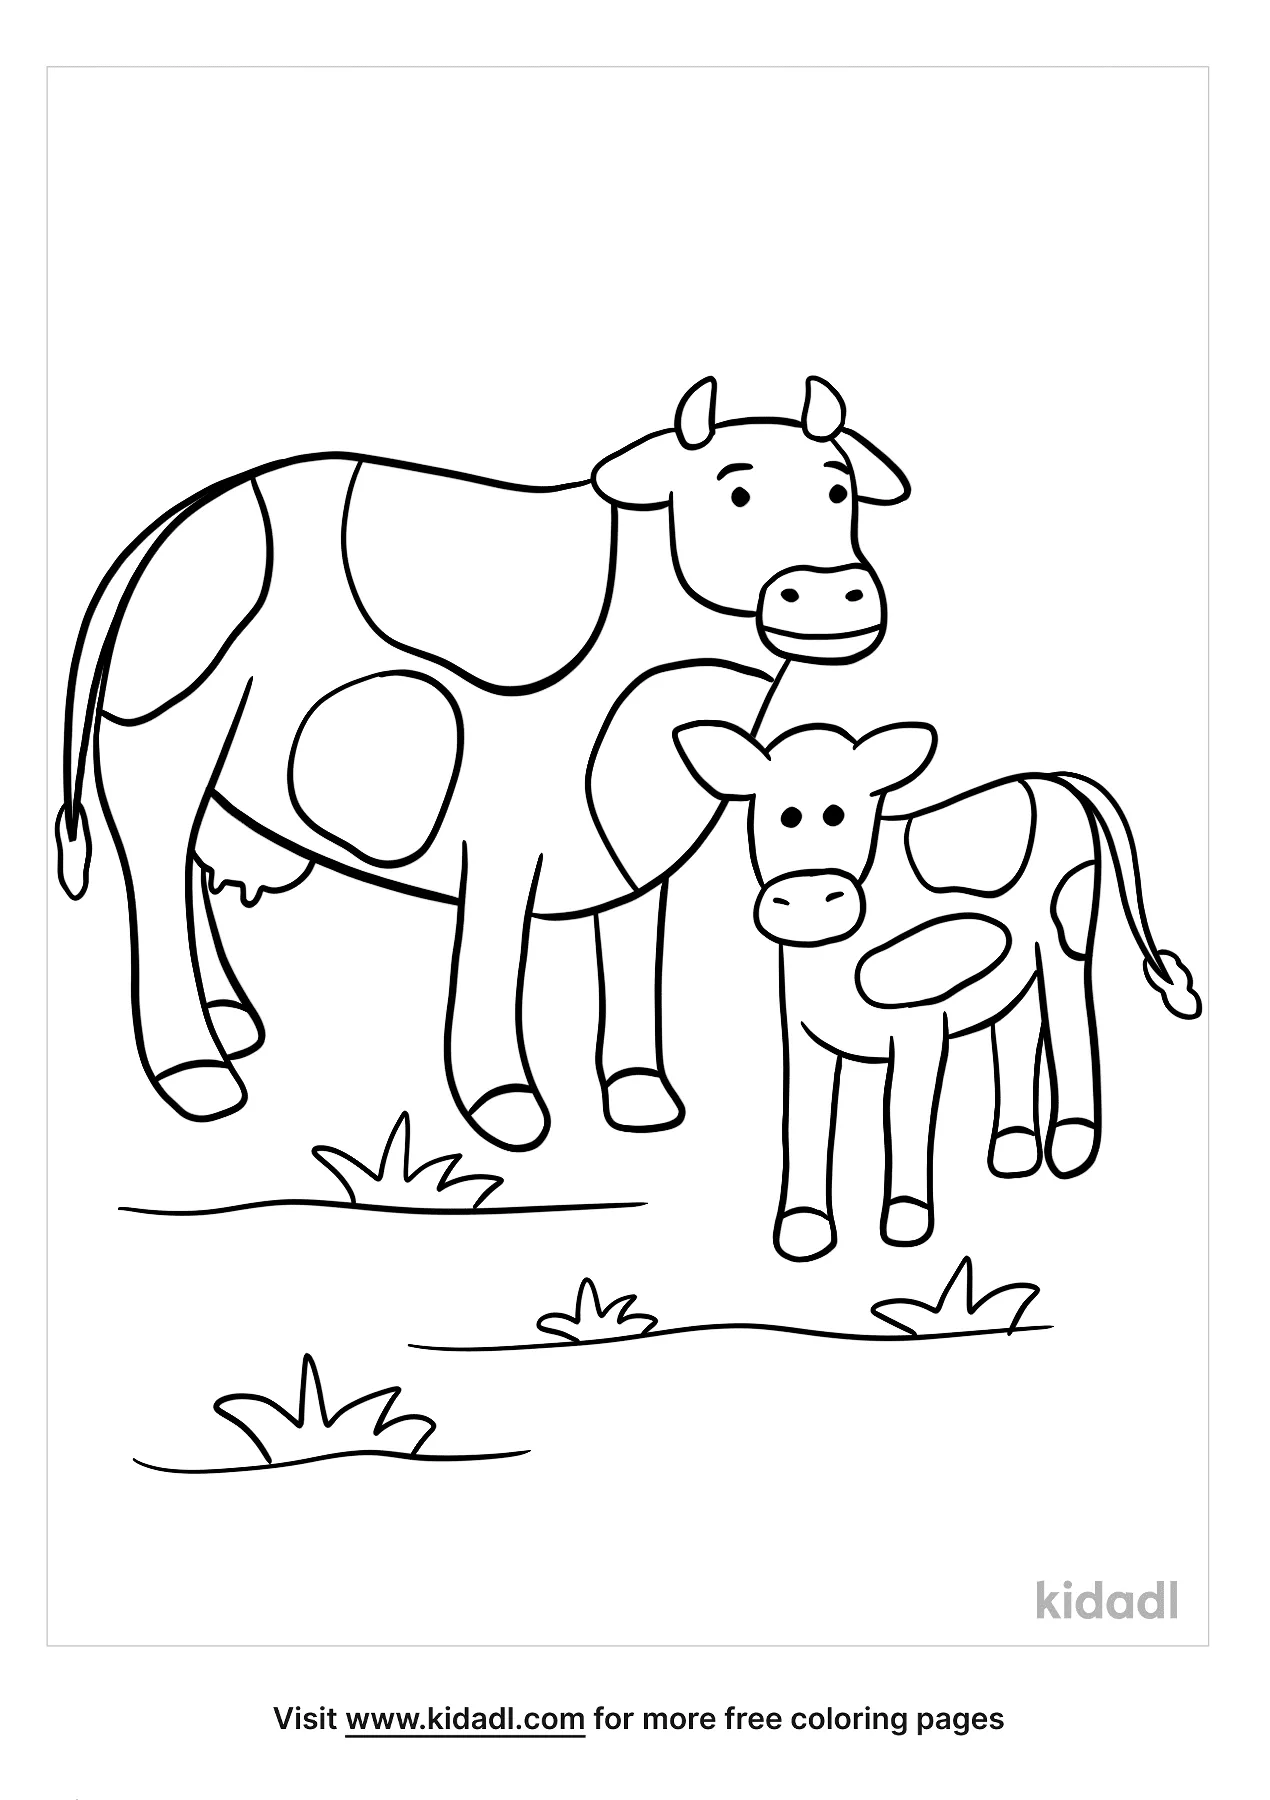 Cow And Calf Coloring Page   Free Farm animals Coloring Page   Kidadl